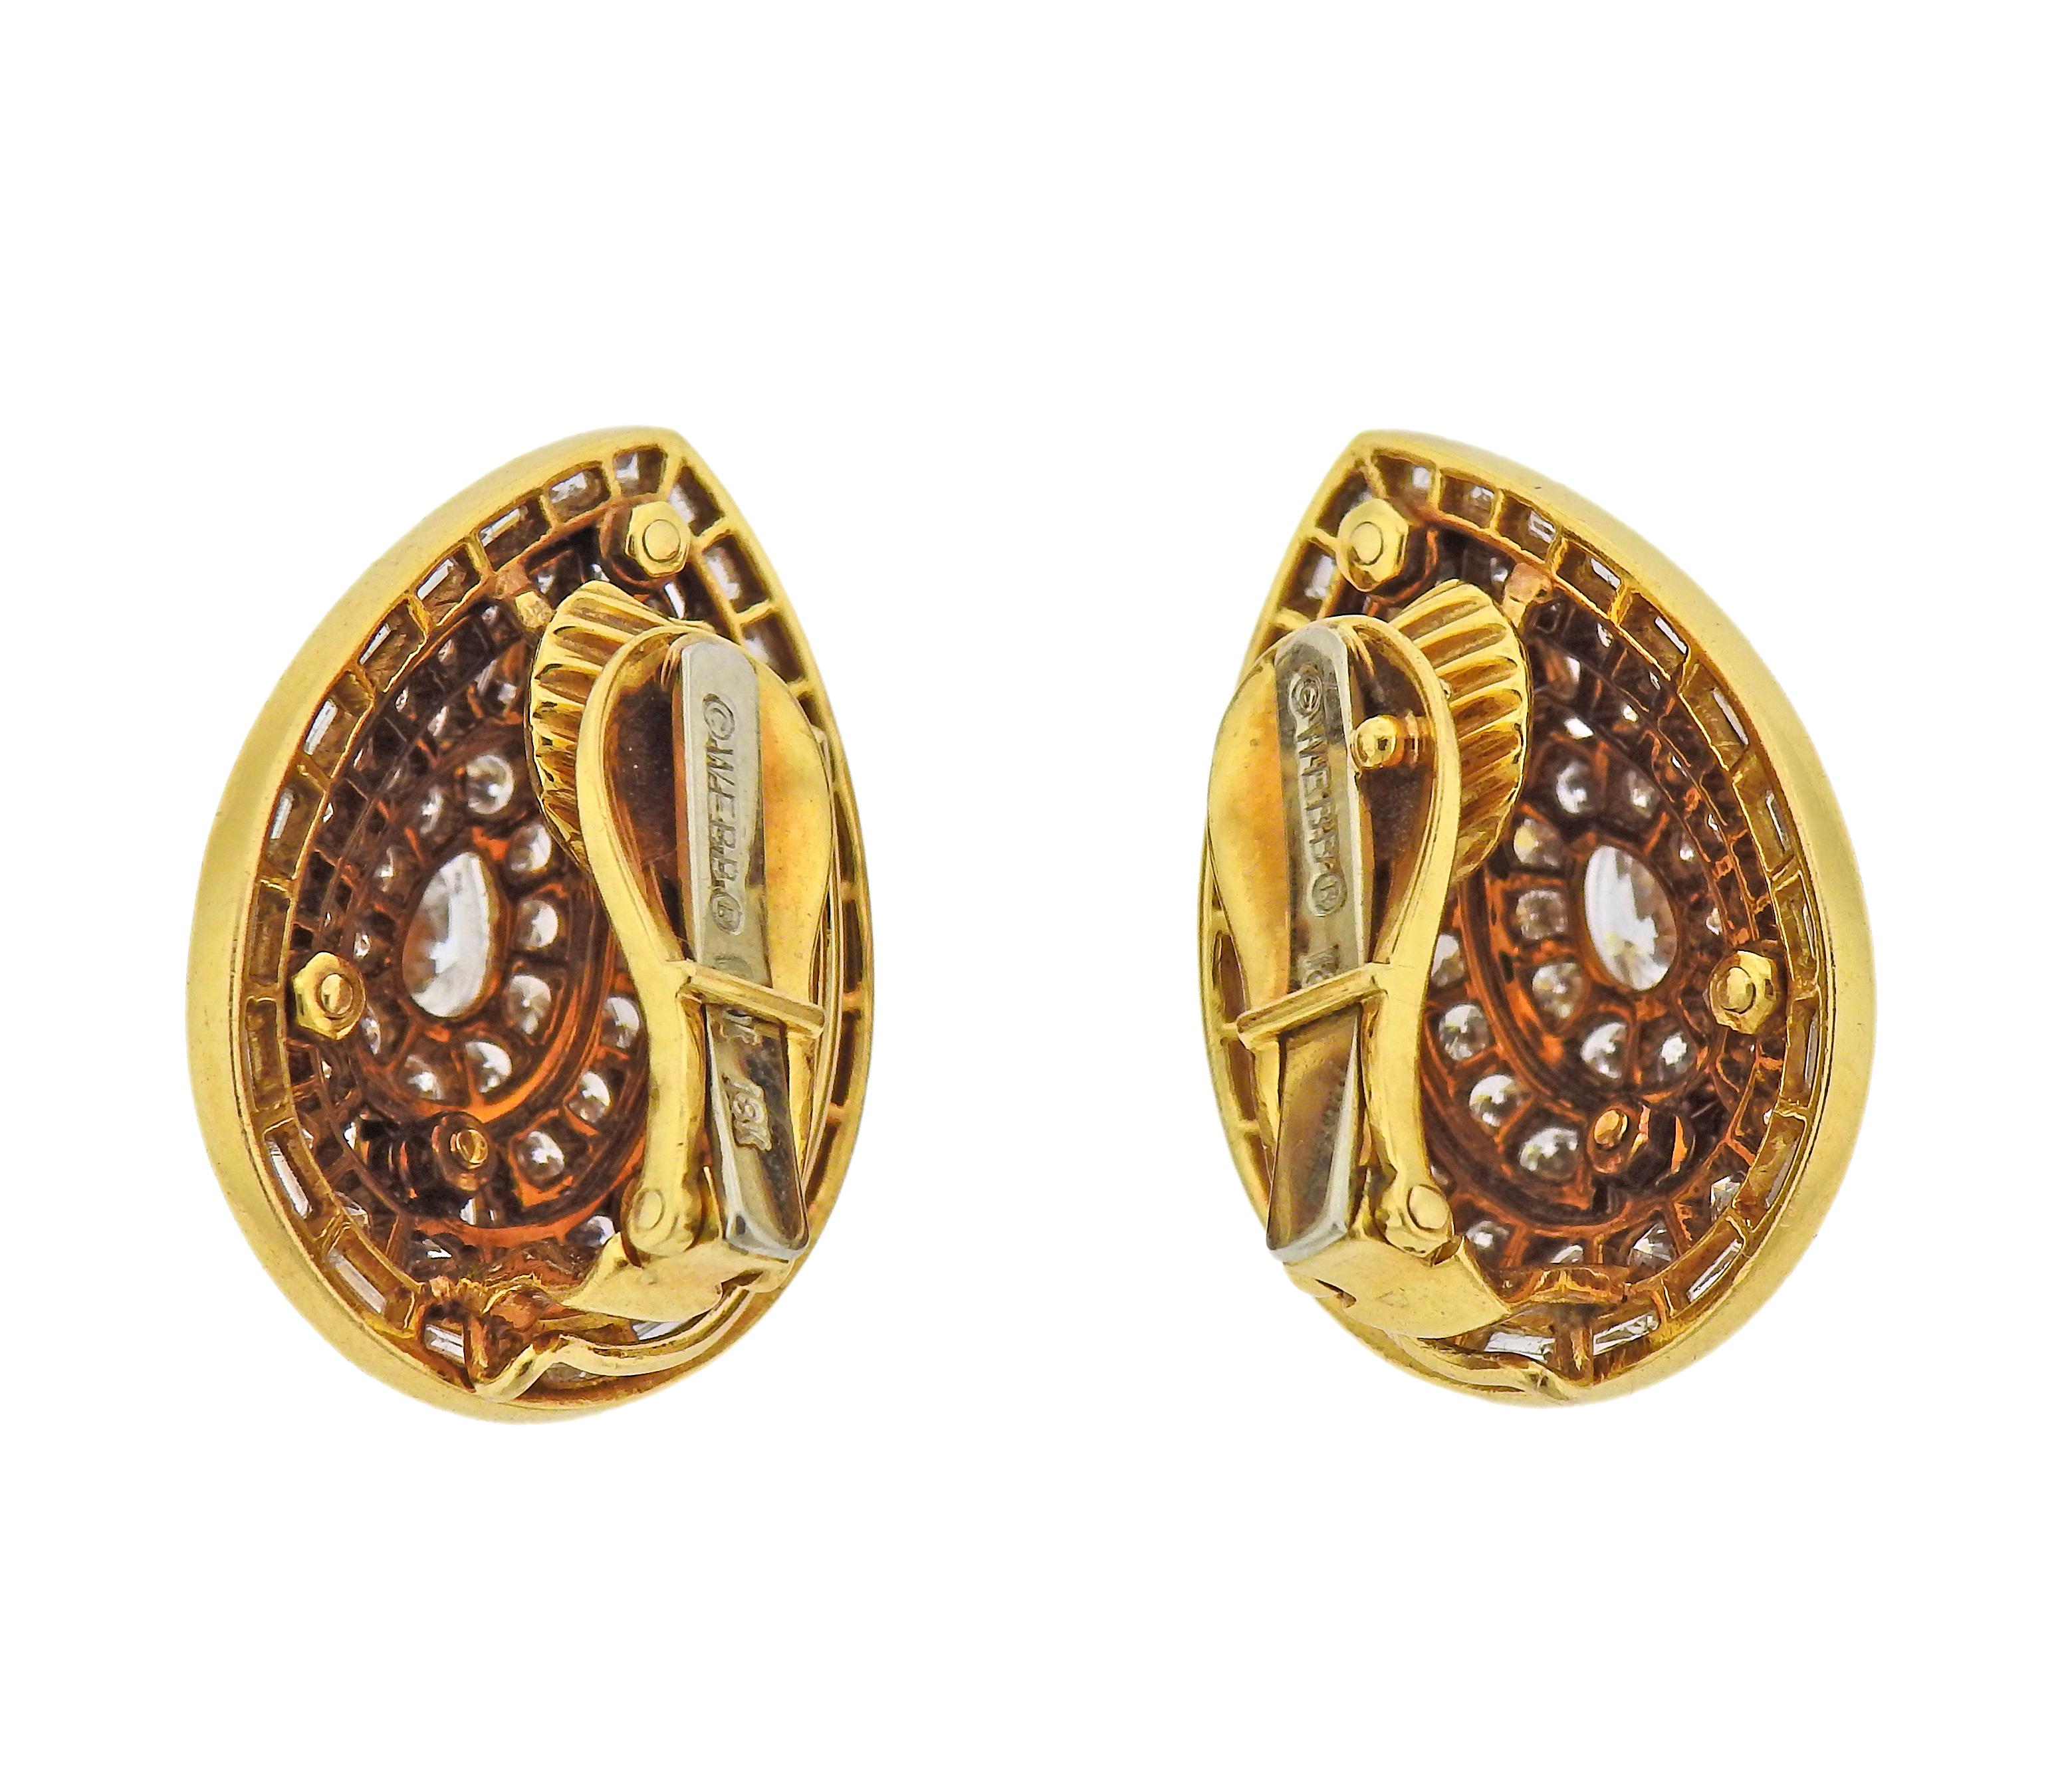 Pair of 18k gold earrings by David Webb, set with apron. 5.50ctw in diamonds. Earrings are 26mm x 20mm. Marked Webb 18k. Weight - 20.6 grams.